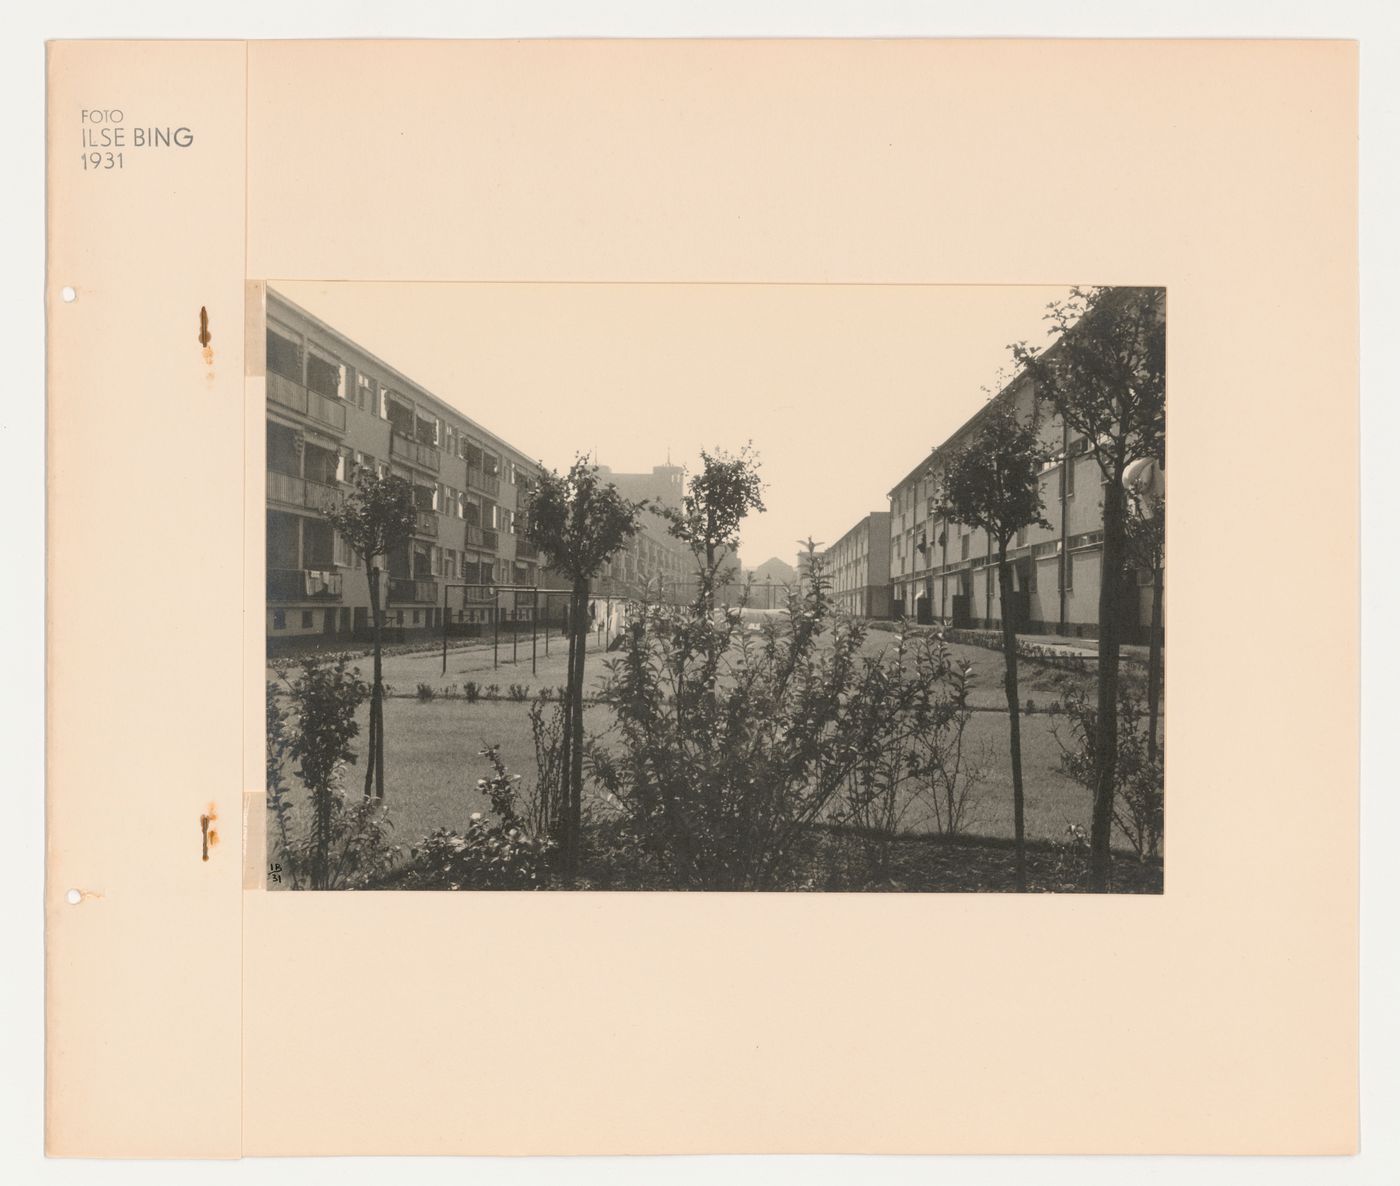 View of garden and apartment houses in the Hellerhof Housing Estate, Frankfurt am Main, Germany